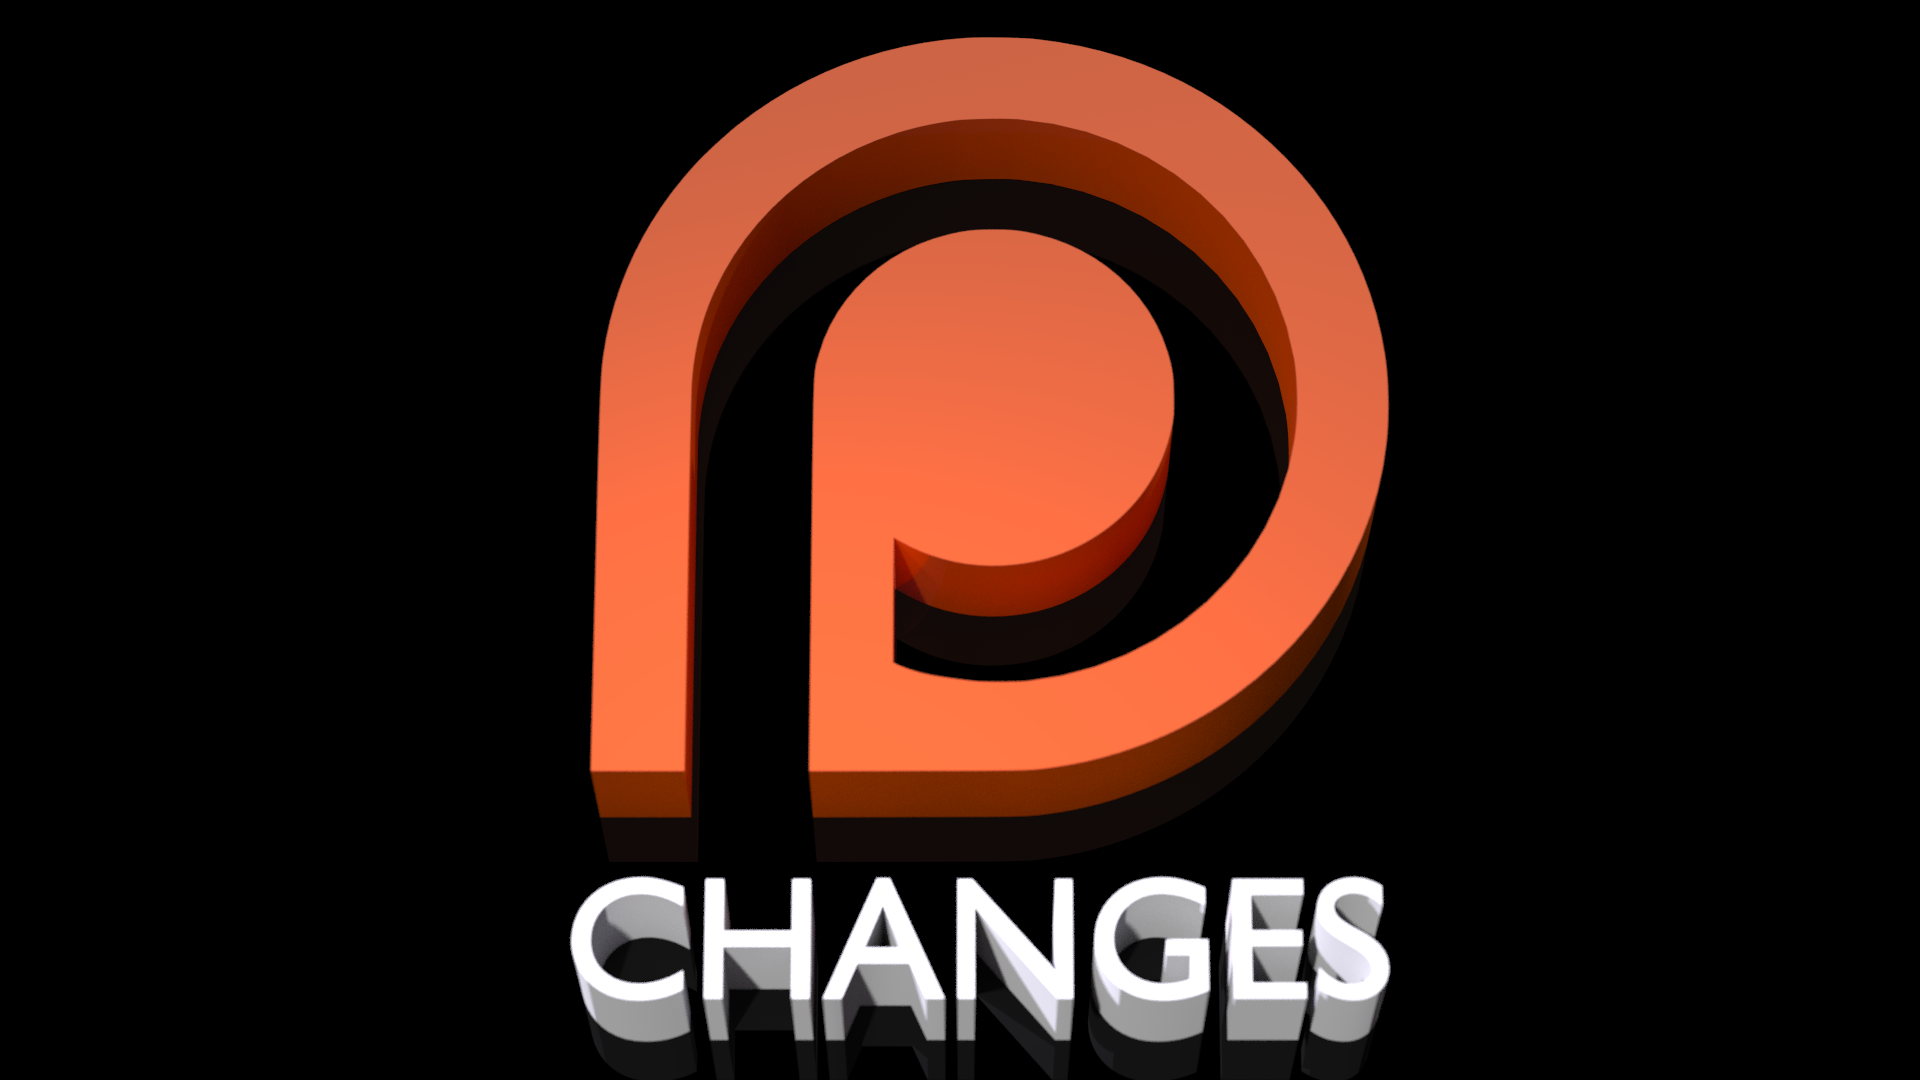 Changes to the Patreon Campaign